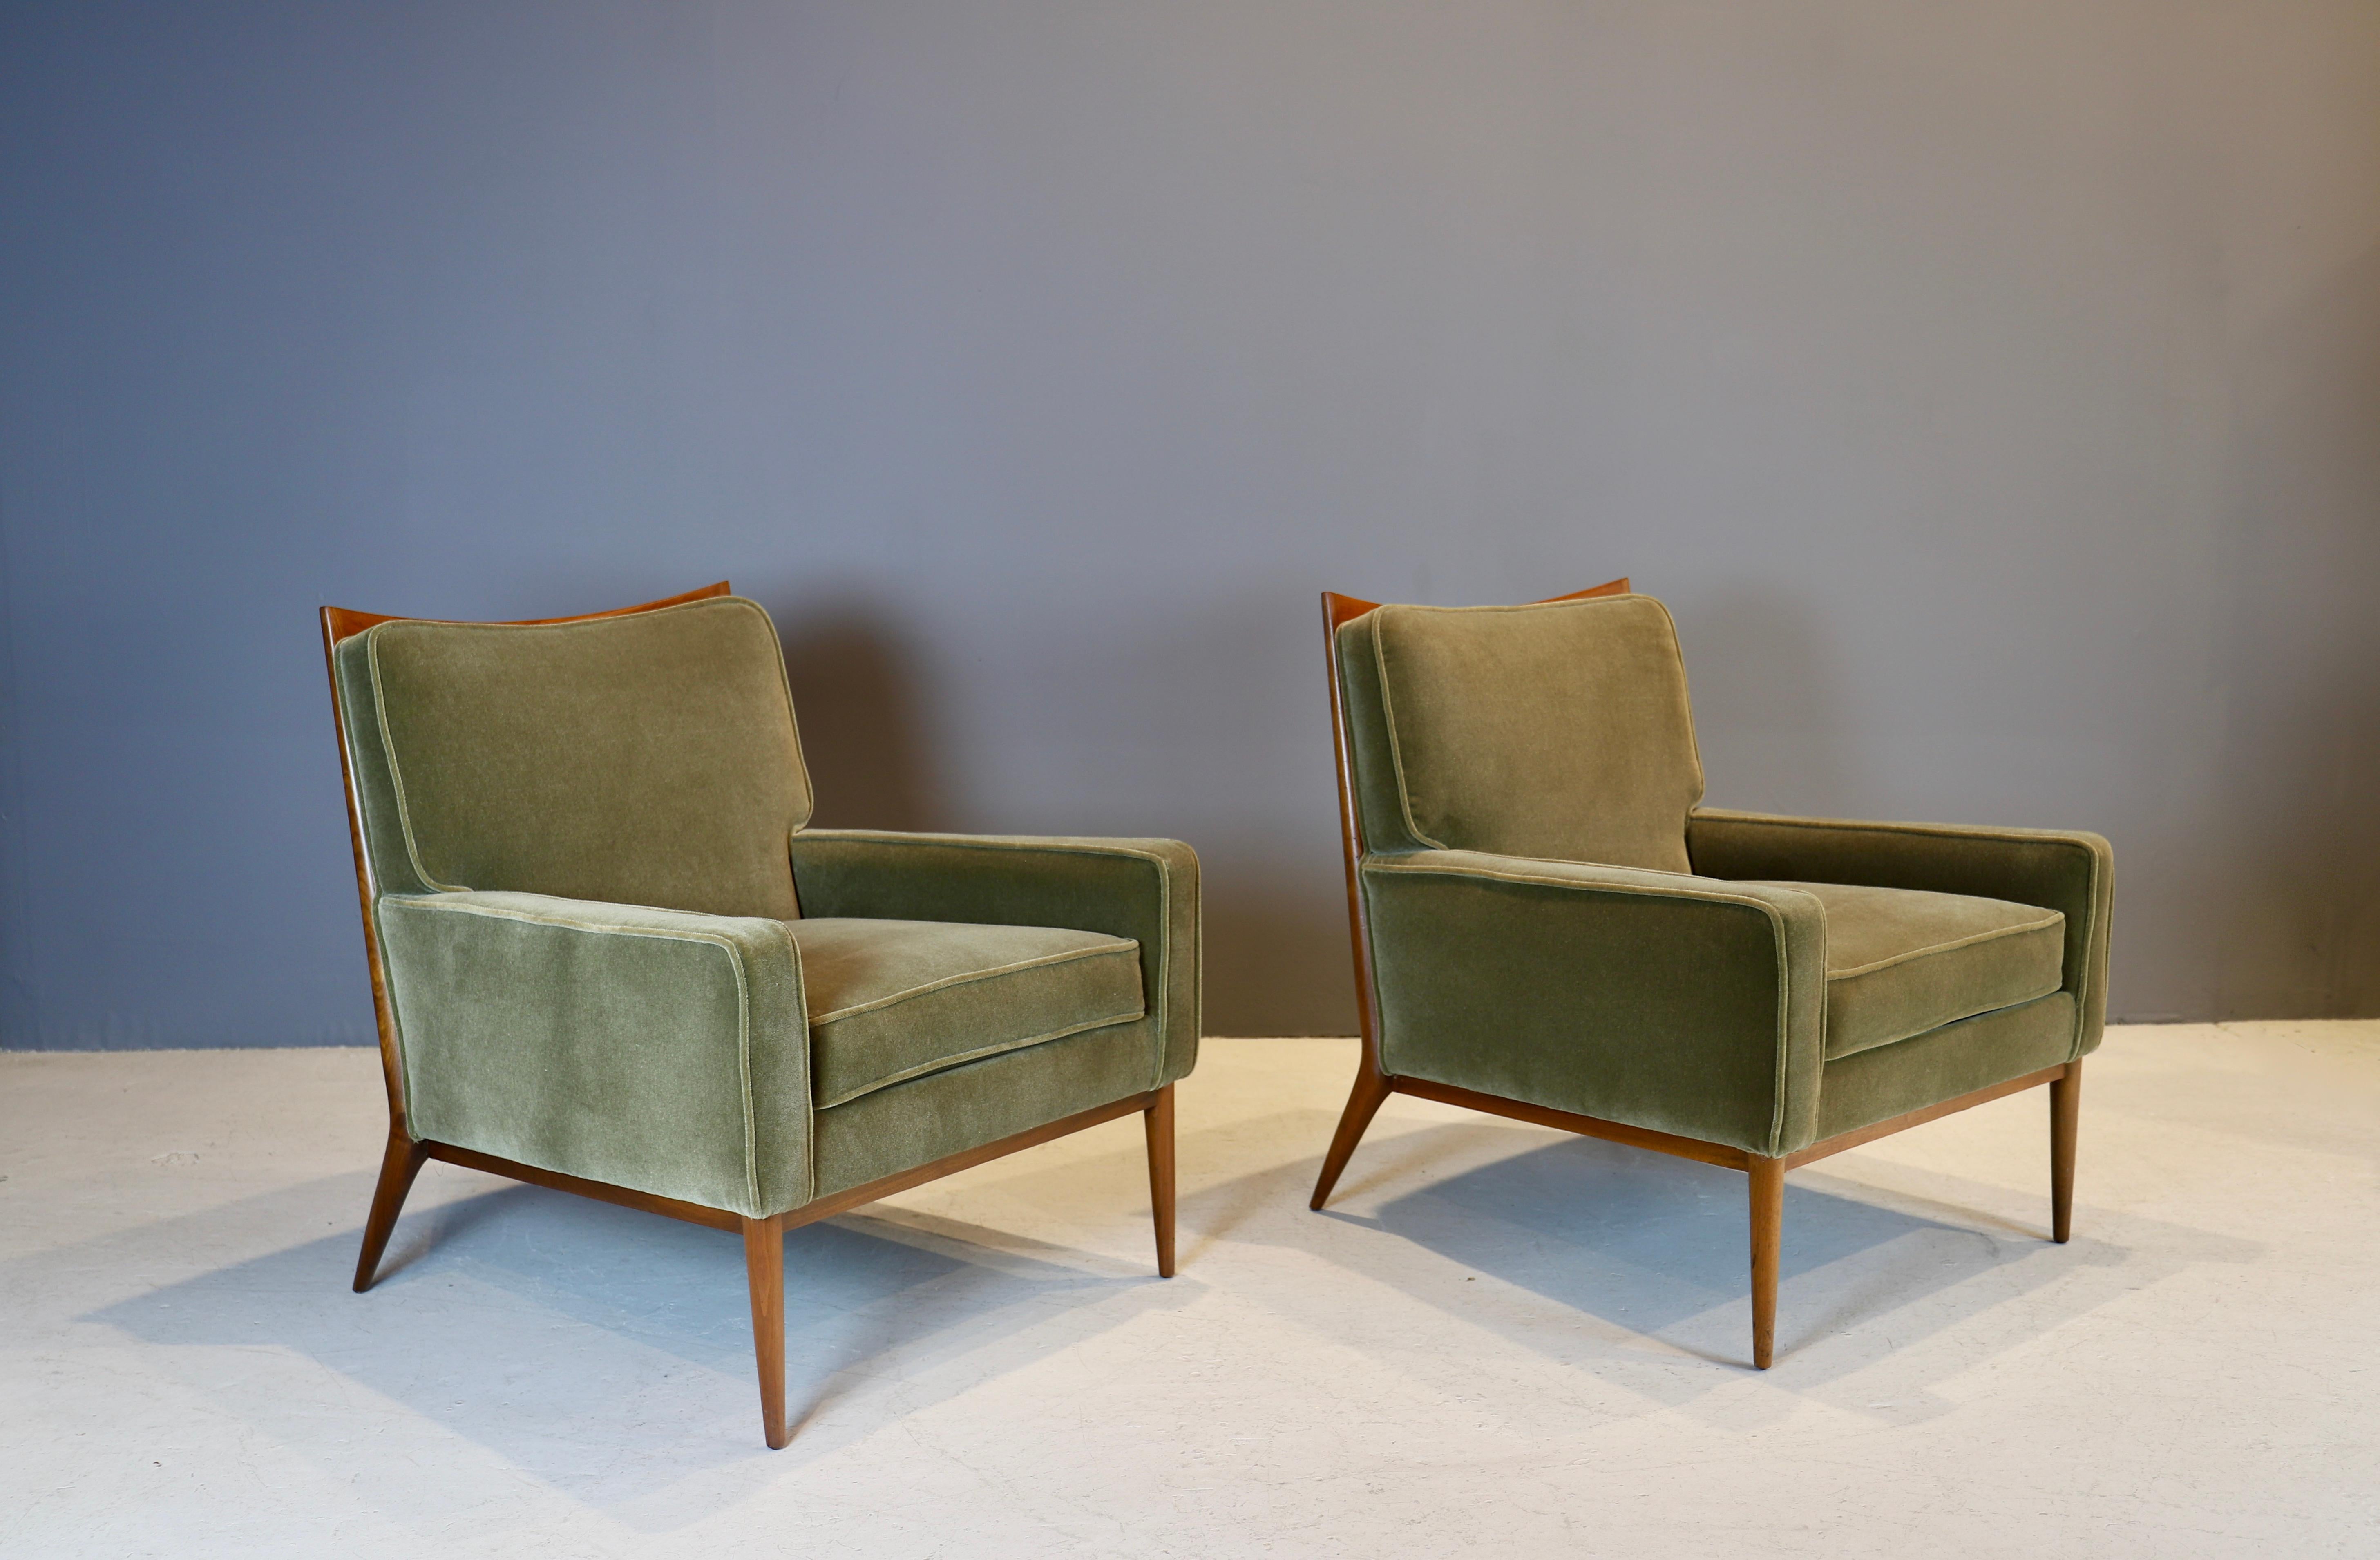 Iconic pair of walnut lounge chairs, designed by Paul McCobb and produced by Calvin, NY, 1950s.
Frames have been refinished in natural and complimented by moss green mohair upholstery.
Original labels underneath.
By far McCobb's most elegant